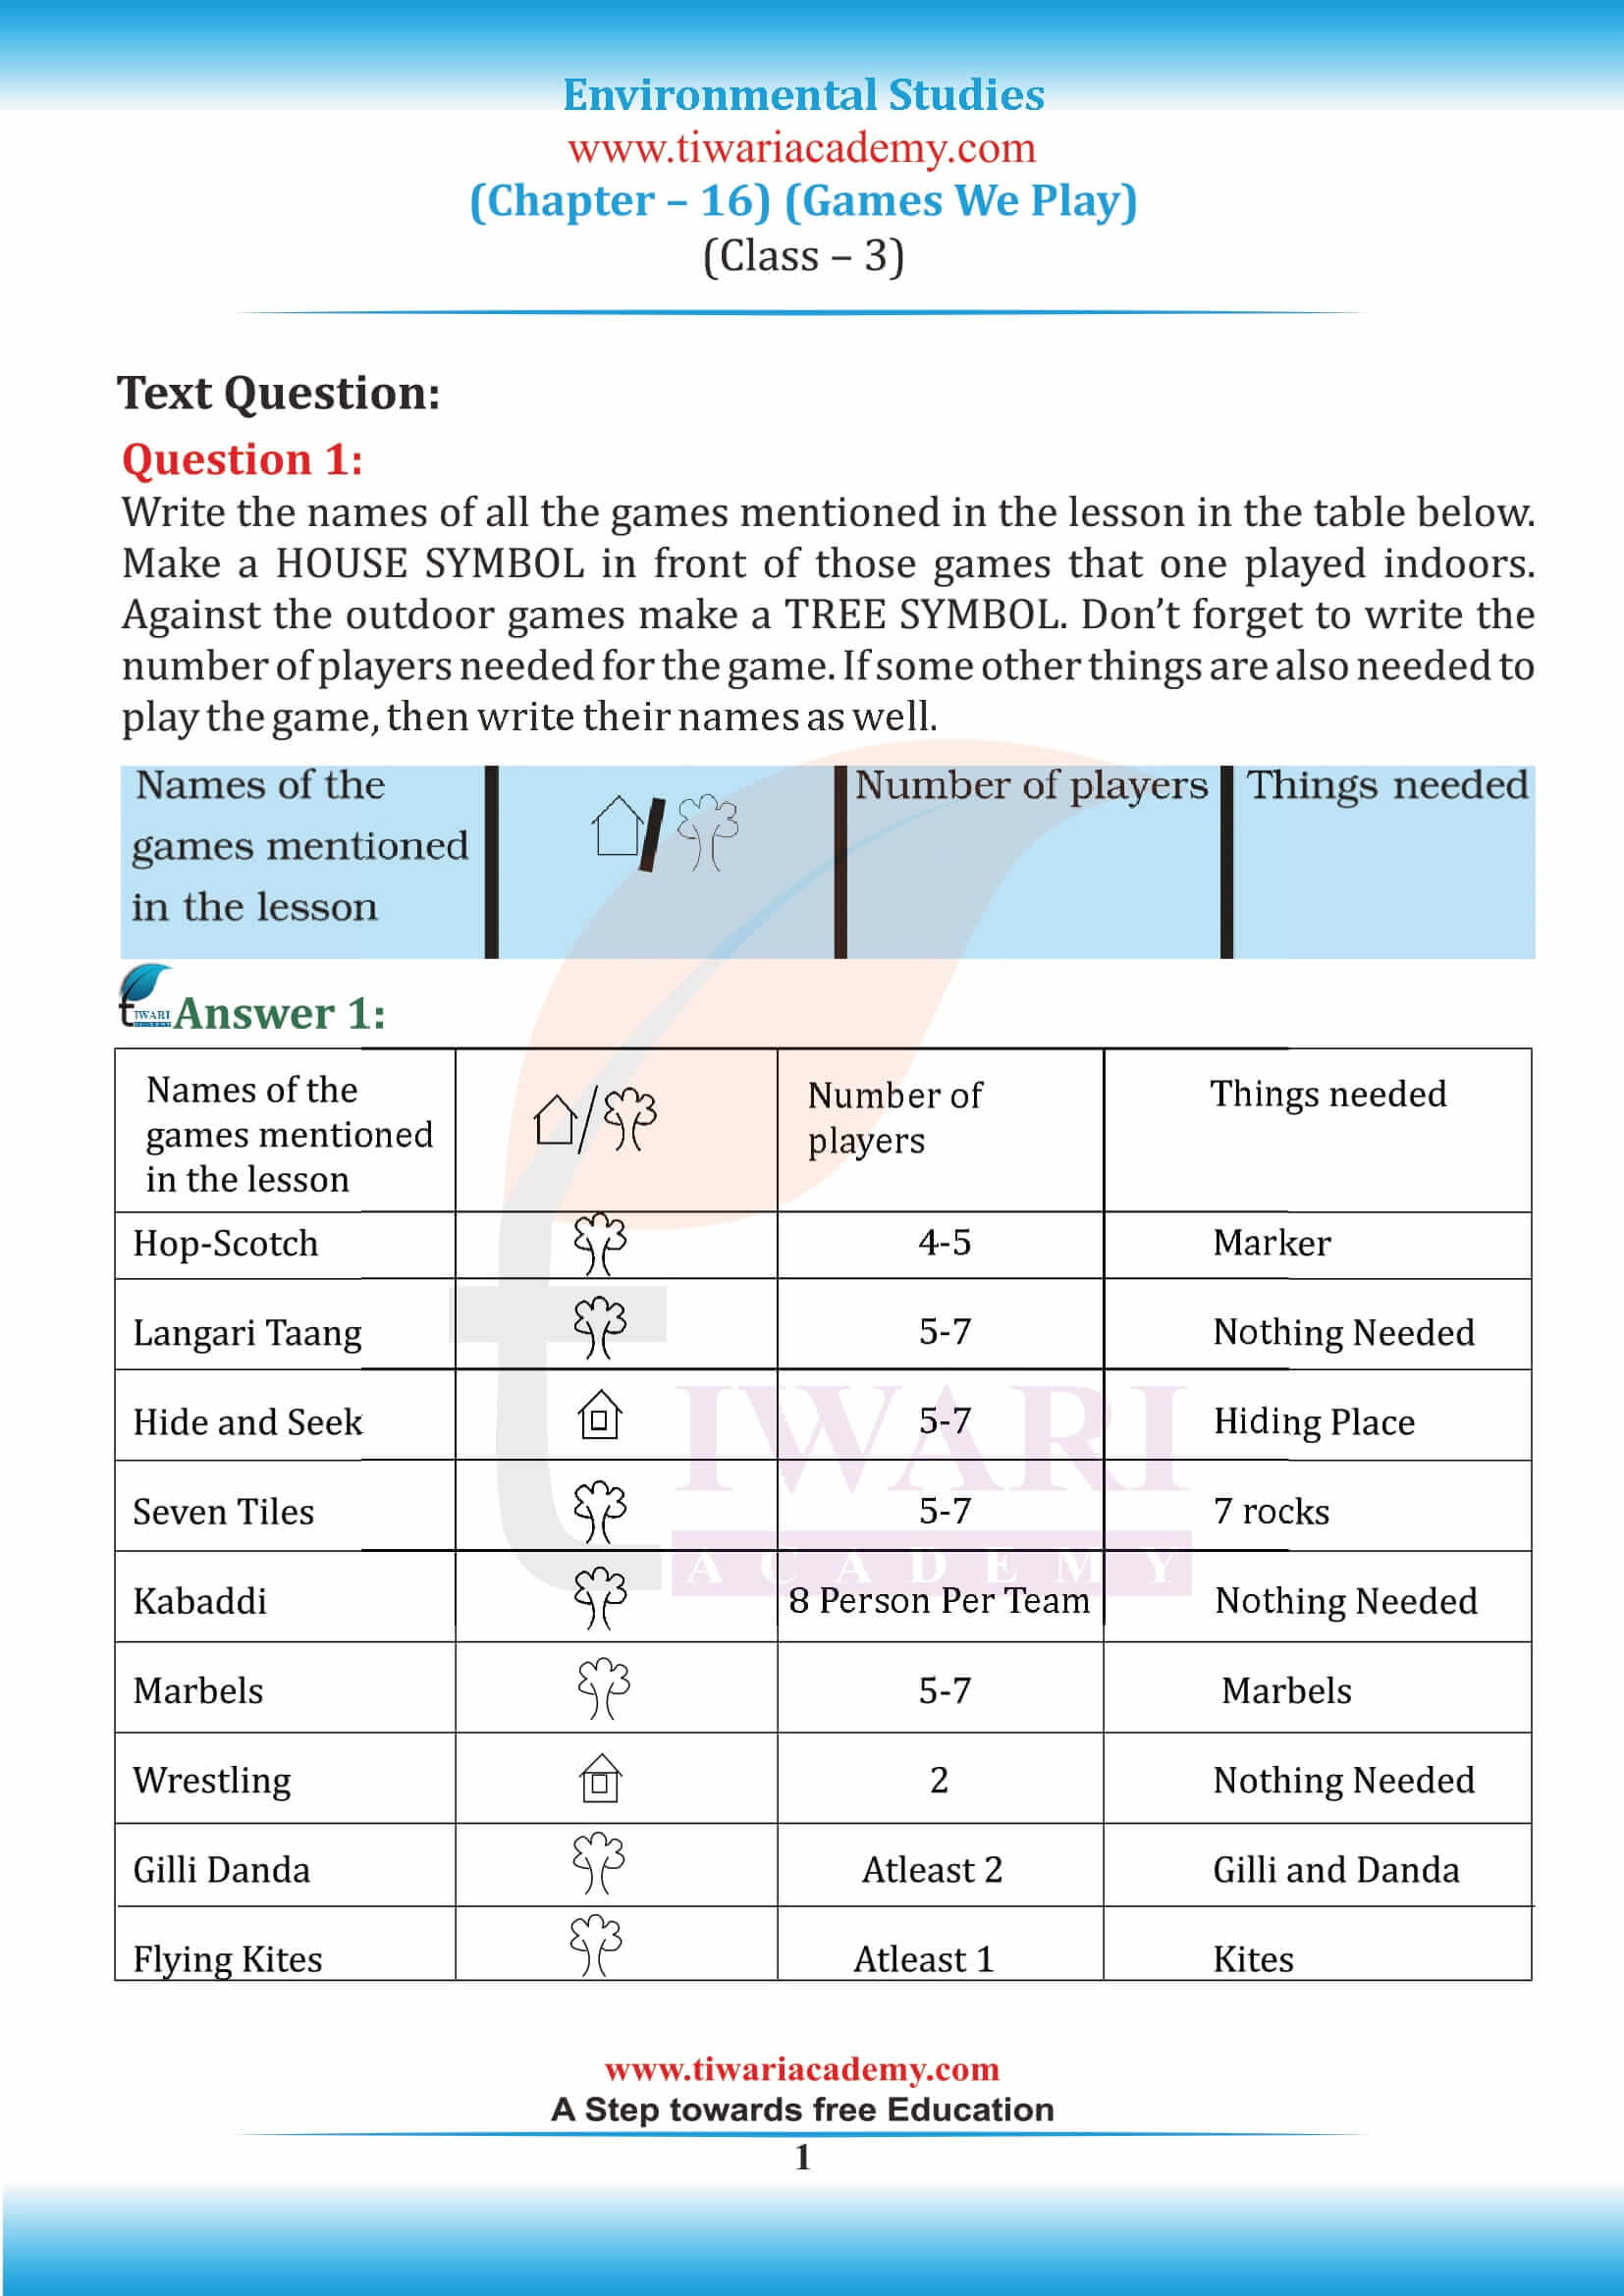 NCERT Solutions for Class 3 EVS Chapter 16 Games We Play